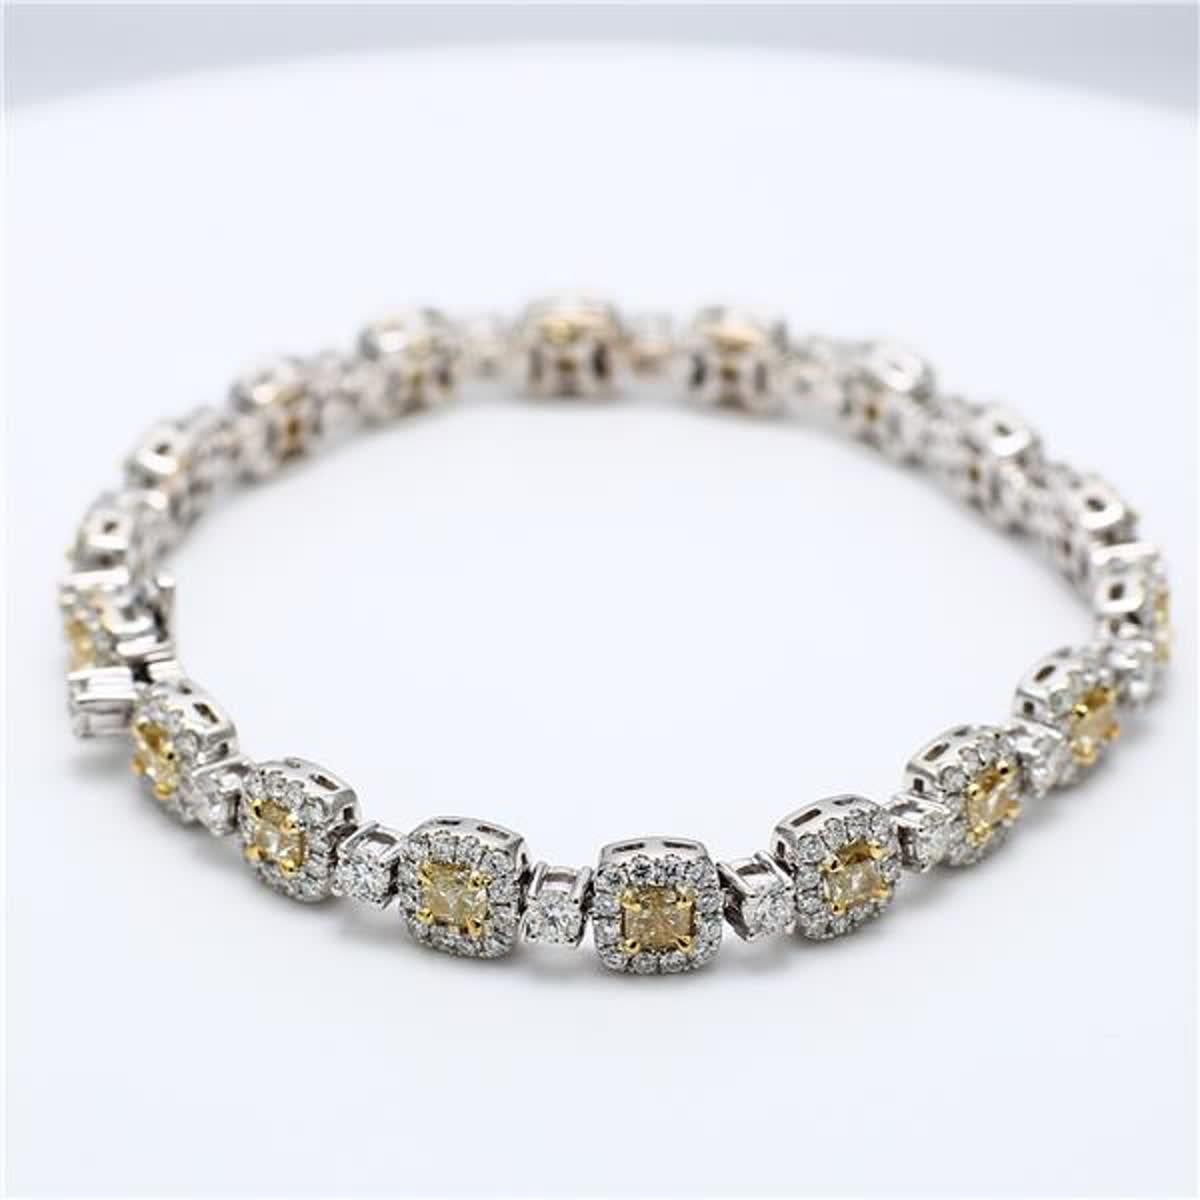 RareGemWorld's classic diamond bracelet. Mounted in a beautiful 18K Yellow and White Gold setting with natural cushion cut yellow diamonds. The yellow diamonds are surrounded by small round natural white diamond melee as well as diamonds continuing